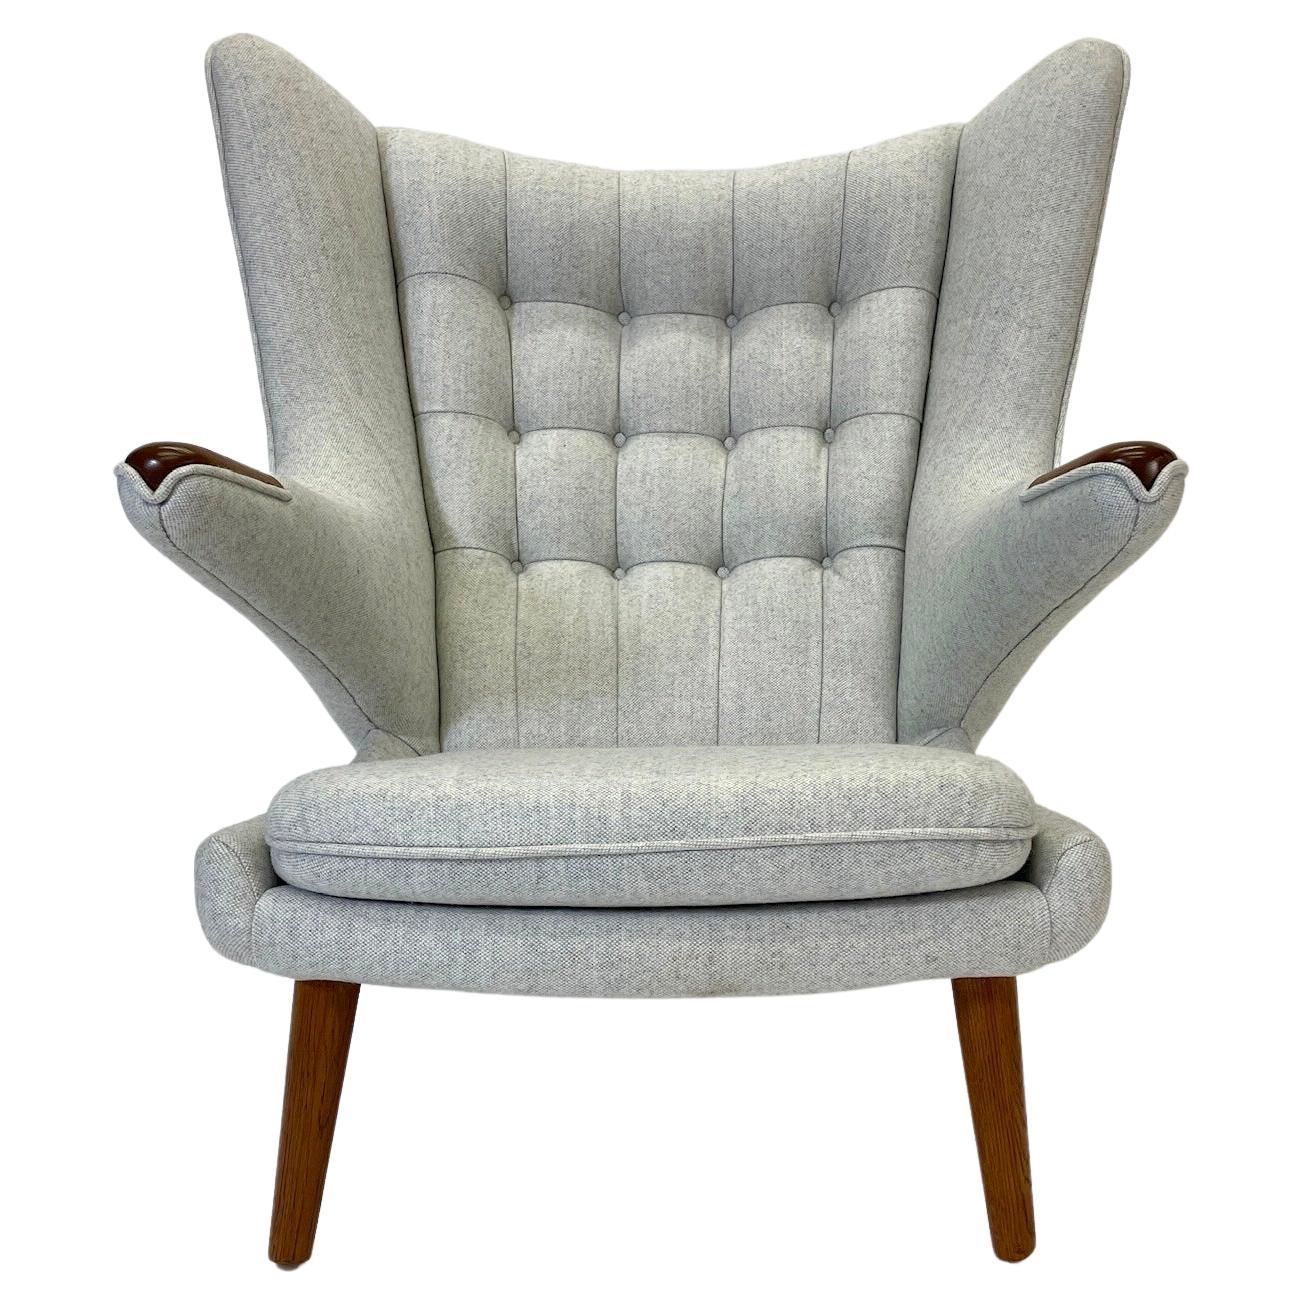 The Papa Bear Chair  is an absolutely stunning  AP-29. A truly iconic chair newly upholstered in the most beautiful grey Maharam wool The chair features beautiful oak legs and teak paws.

These chairs, while created during the Mid century modern